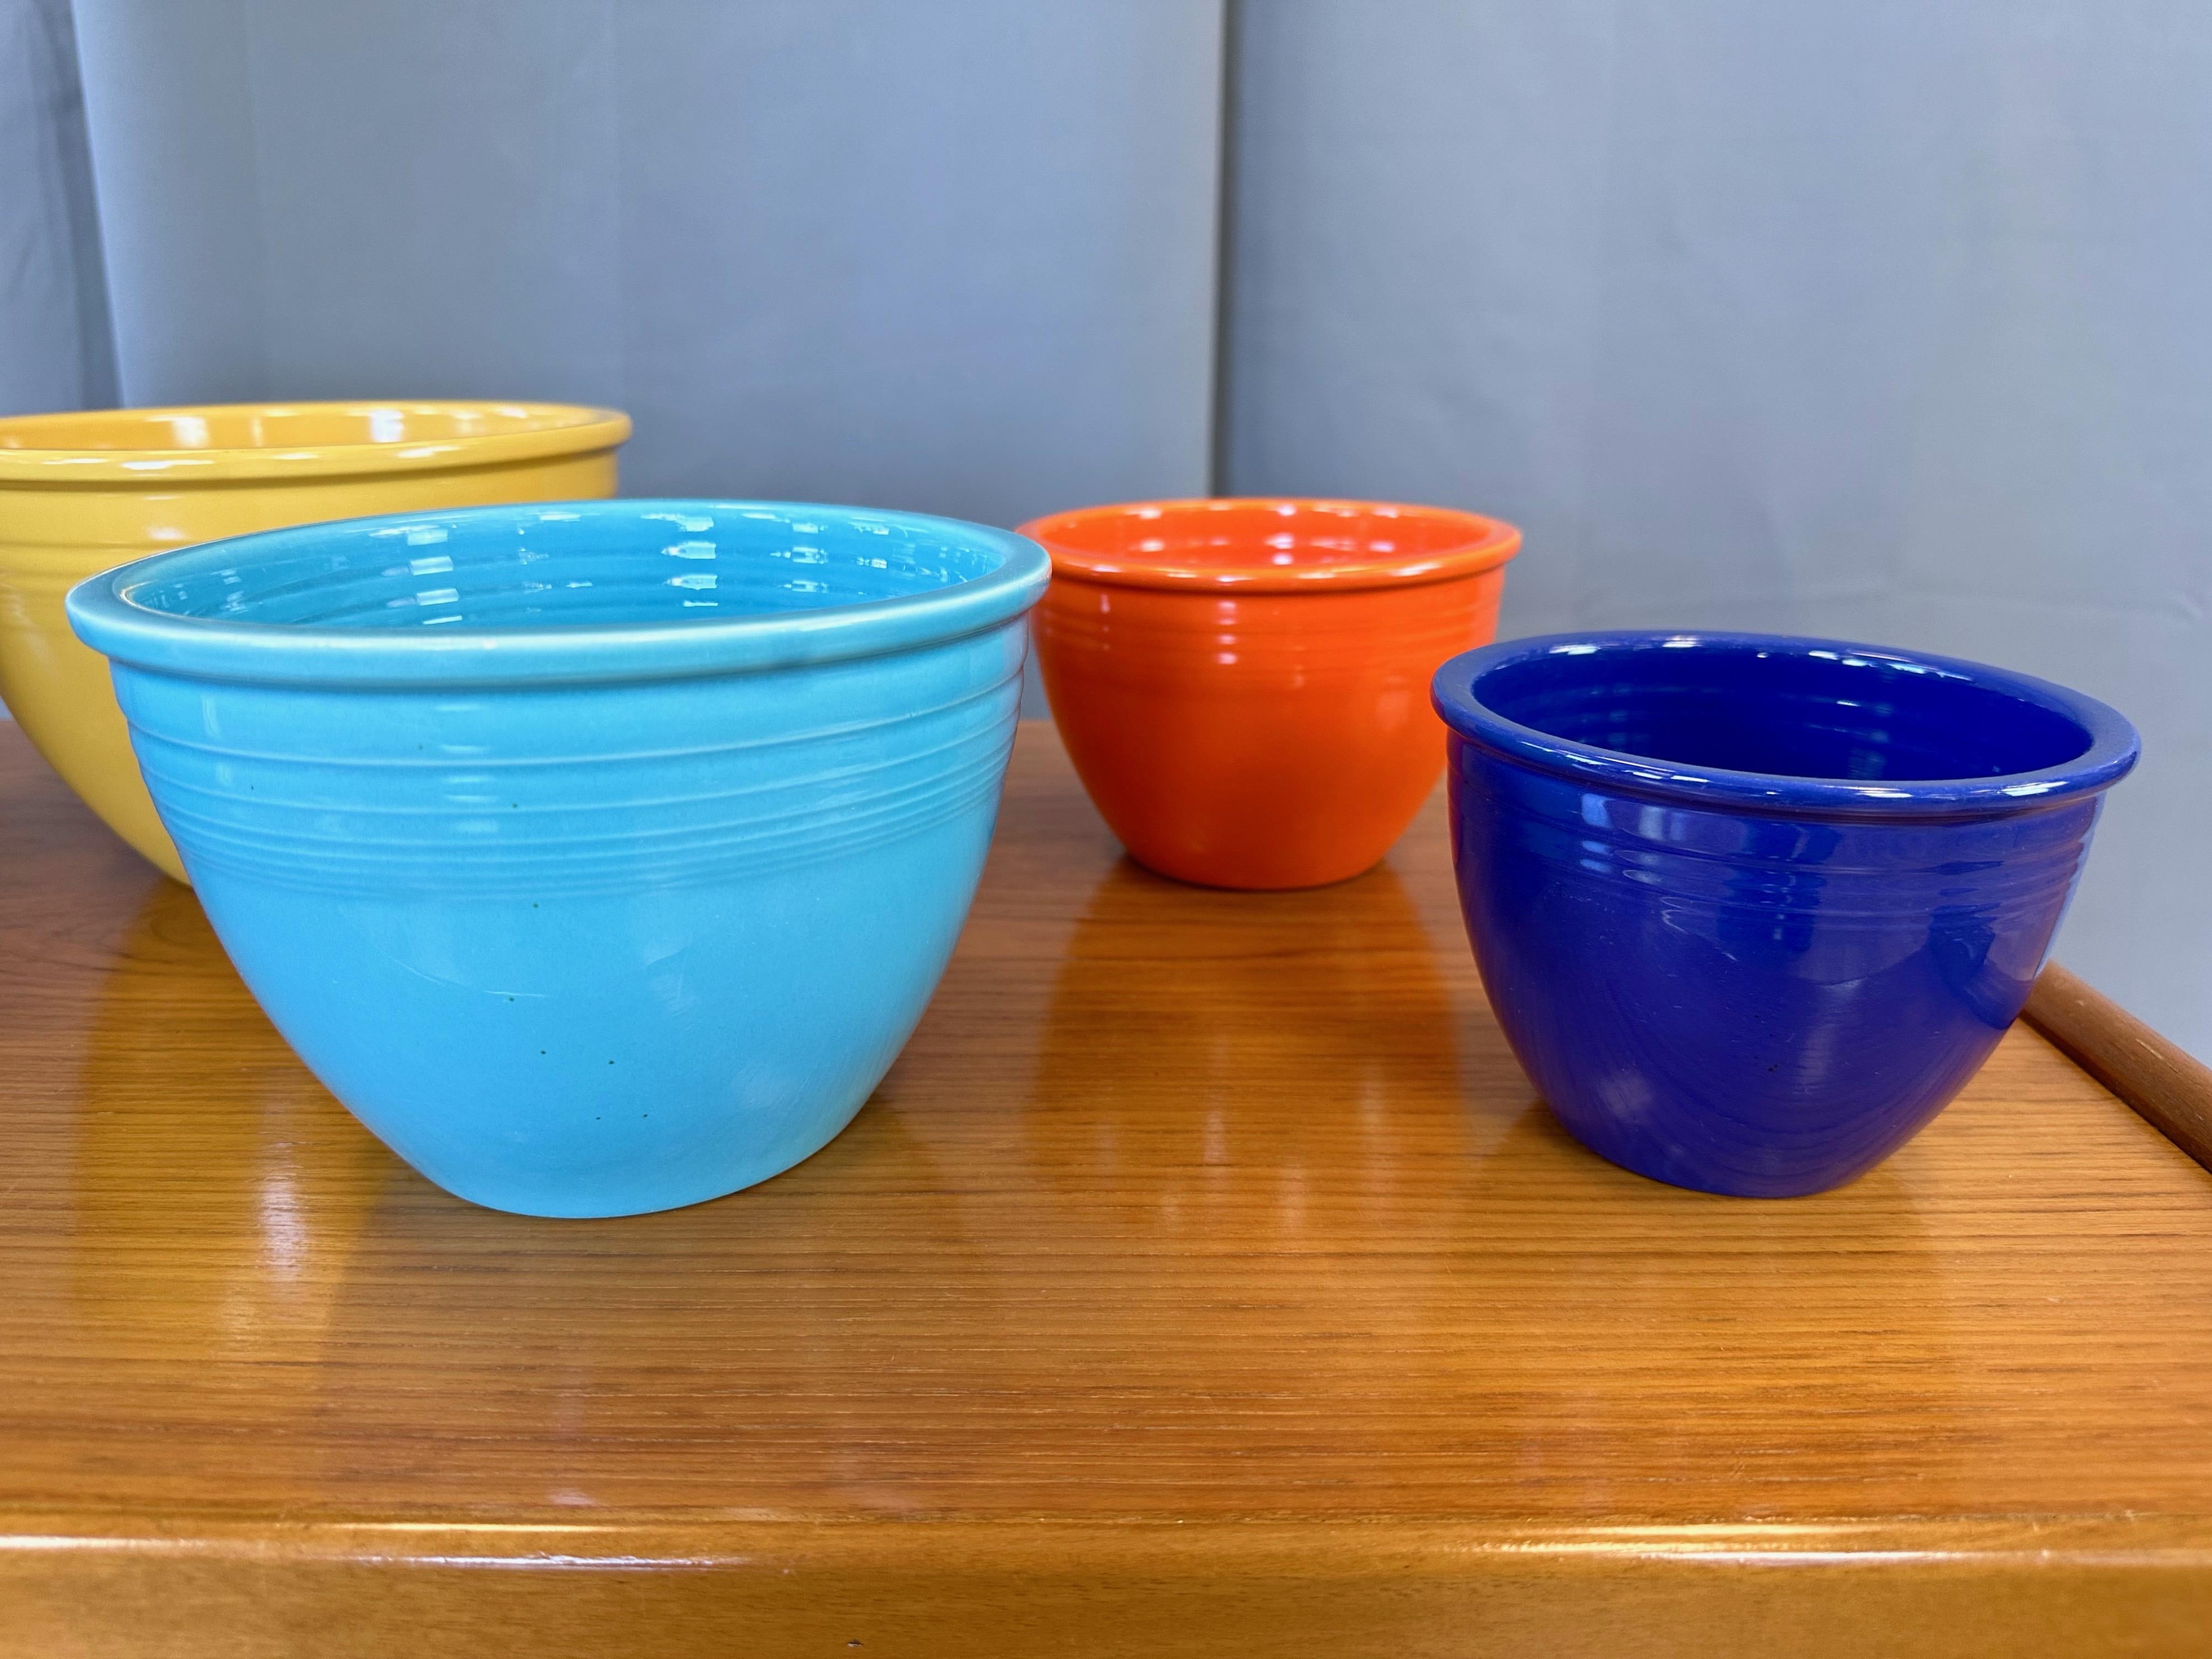 Glazed Early Vintage Fiestaware Nesting Mixing Bowls, Multi-Color Set of Six, c. 1940 For Sale